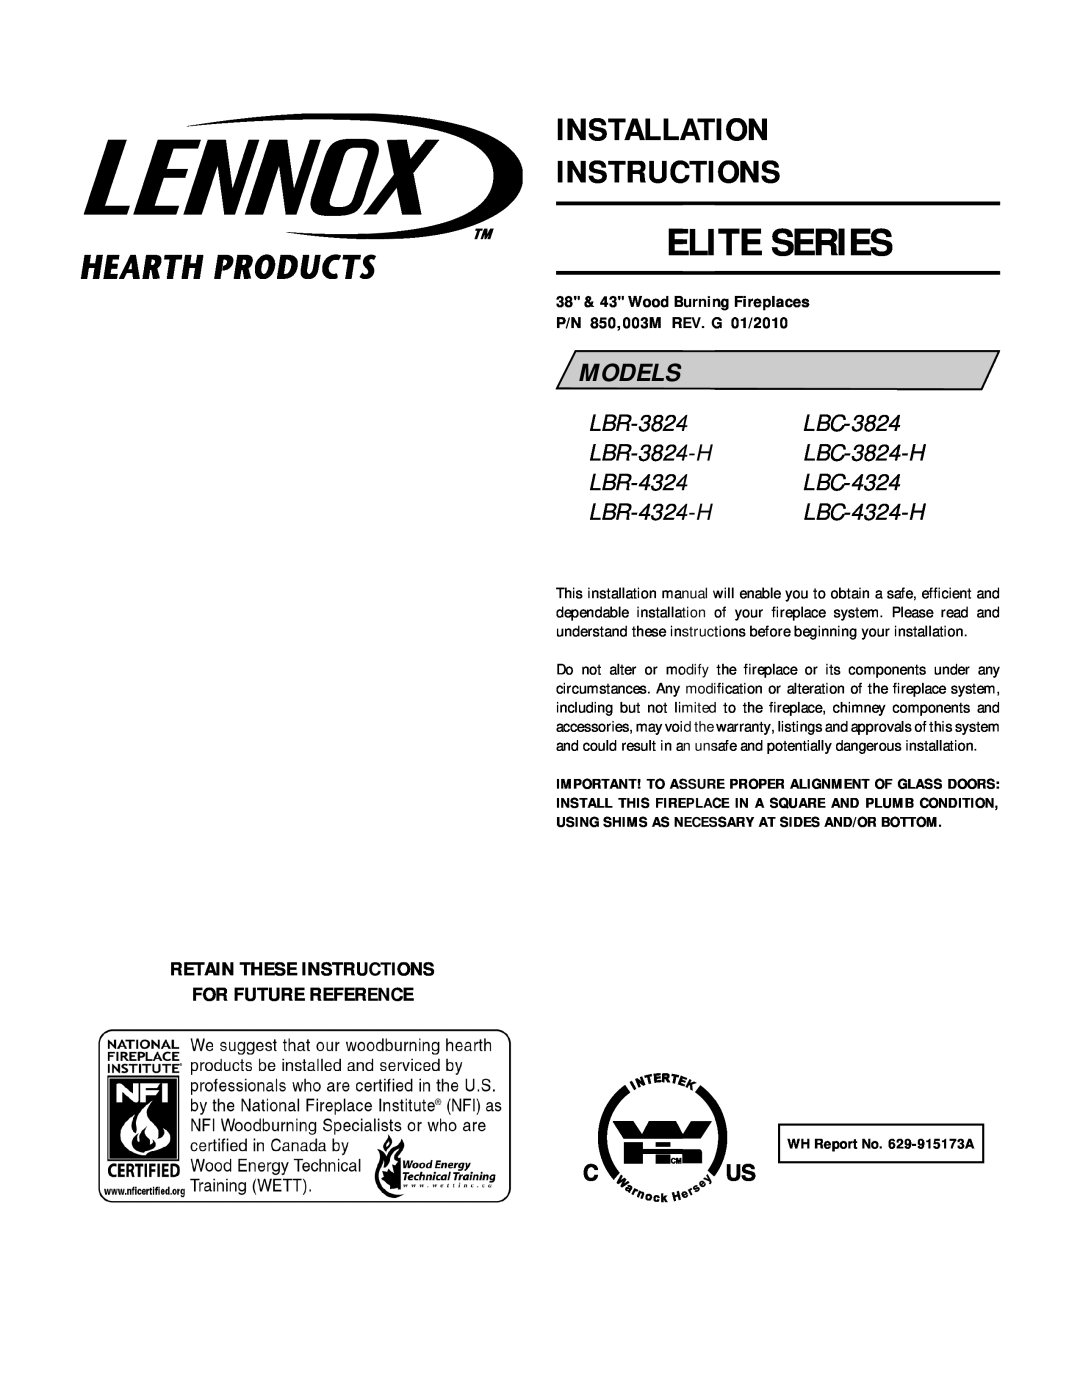 Lennox Hearth LBC-4324-H installation instructions Retain These Instructions For Future Reference, Elite Series, Models 